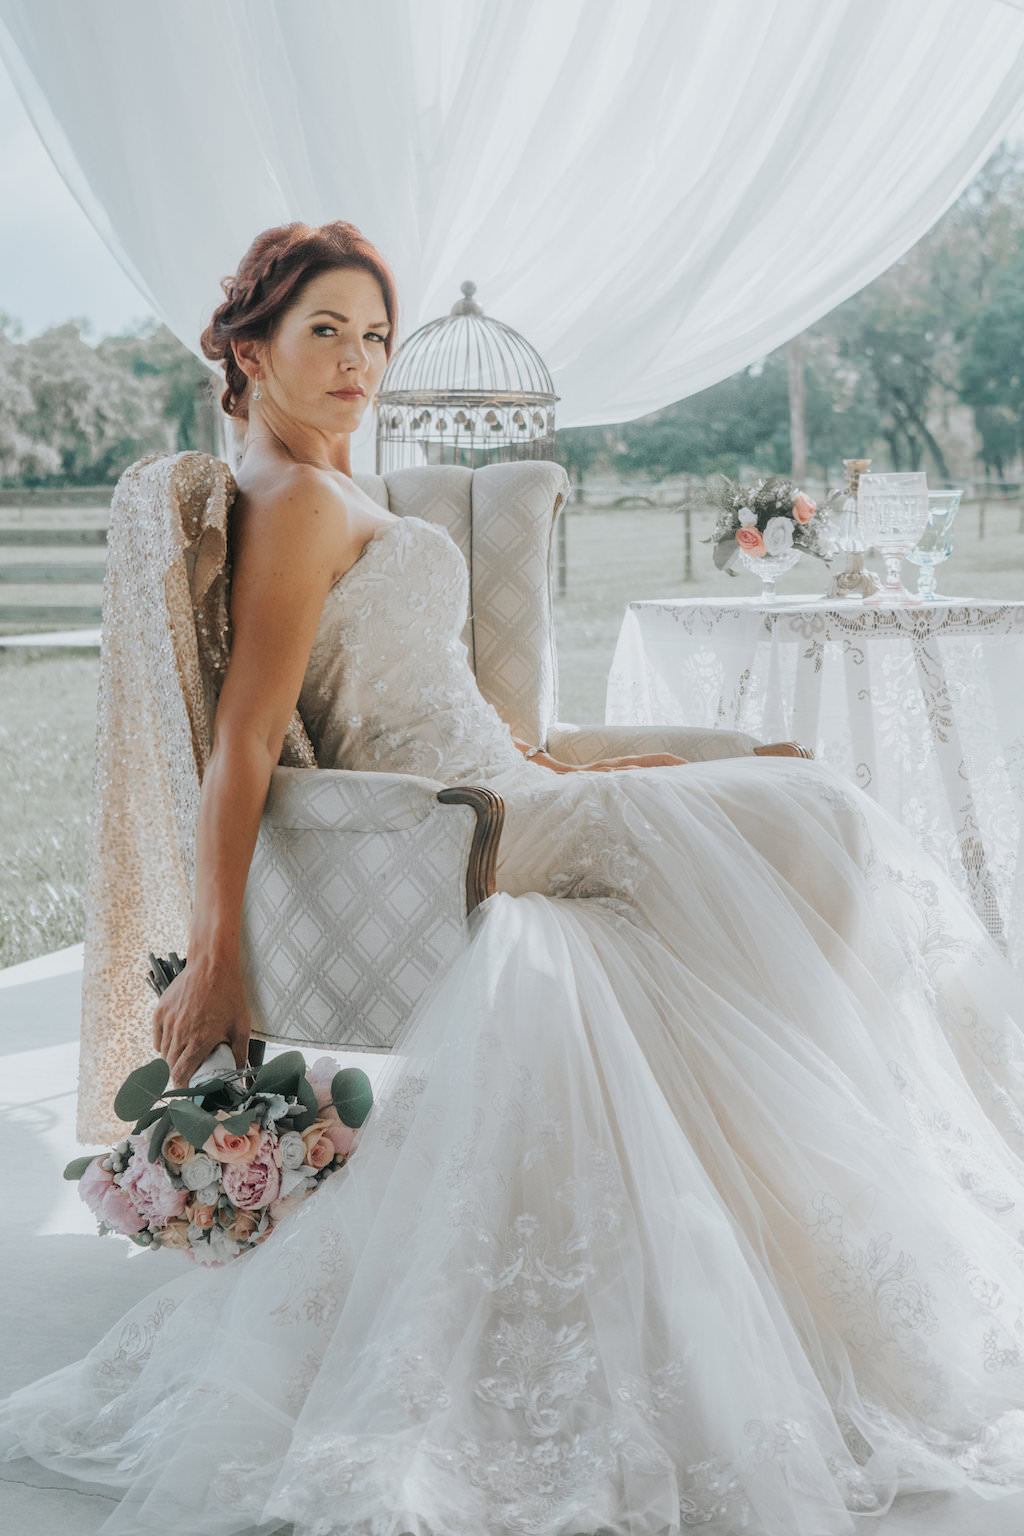 Rustic Farm Wedding Bridal Portrait with Pink and Peach Bouquet with Greenery, White Drapery, and Vintage Bird Cage | Tampa Bay Wedding Planner Kelly Kennedy Weddings and Events